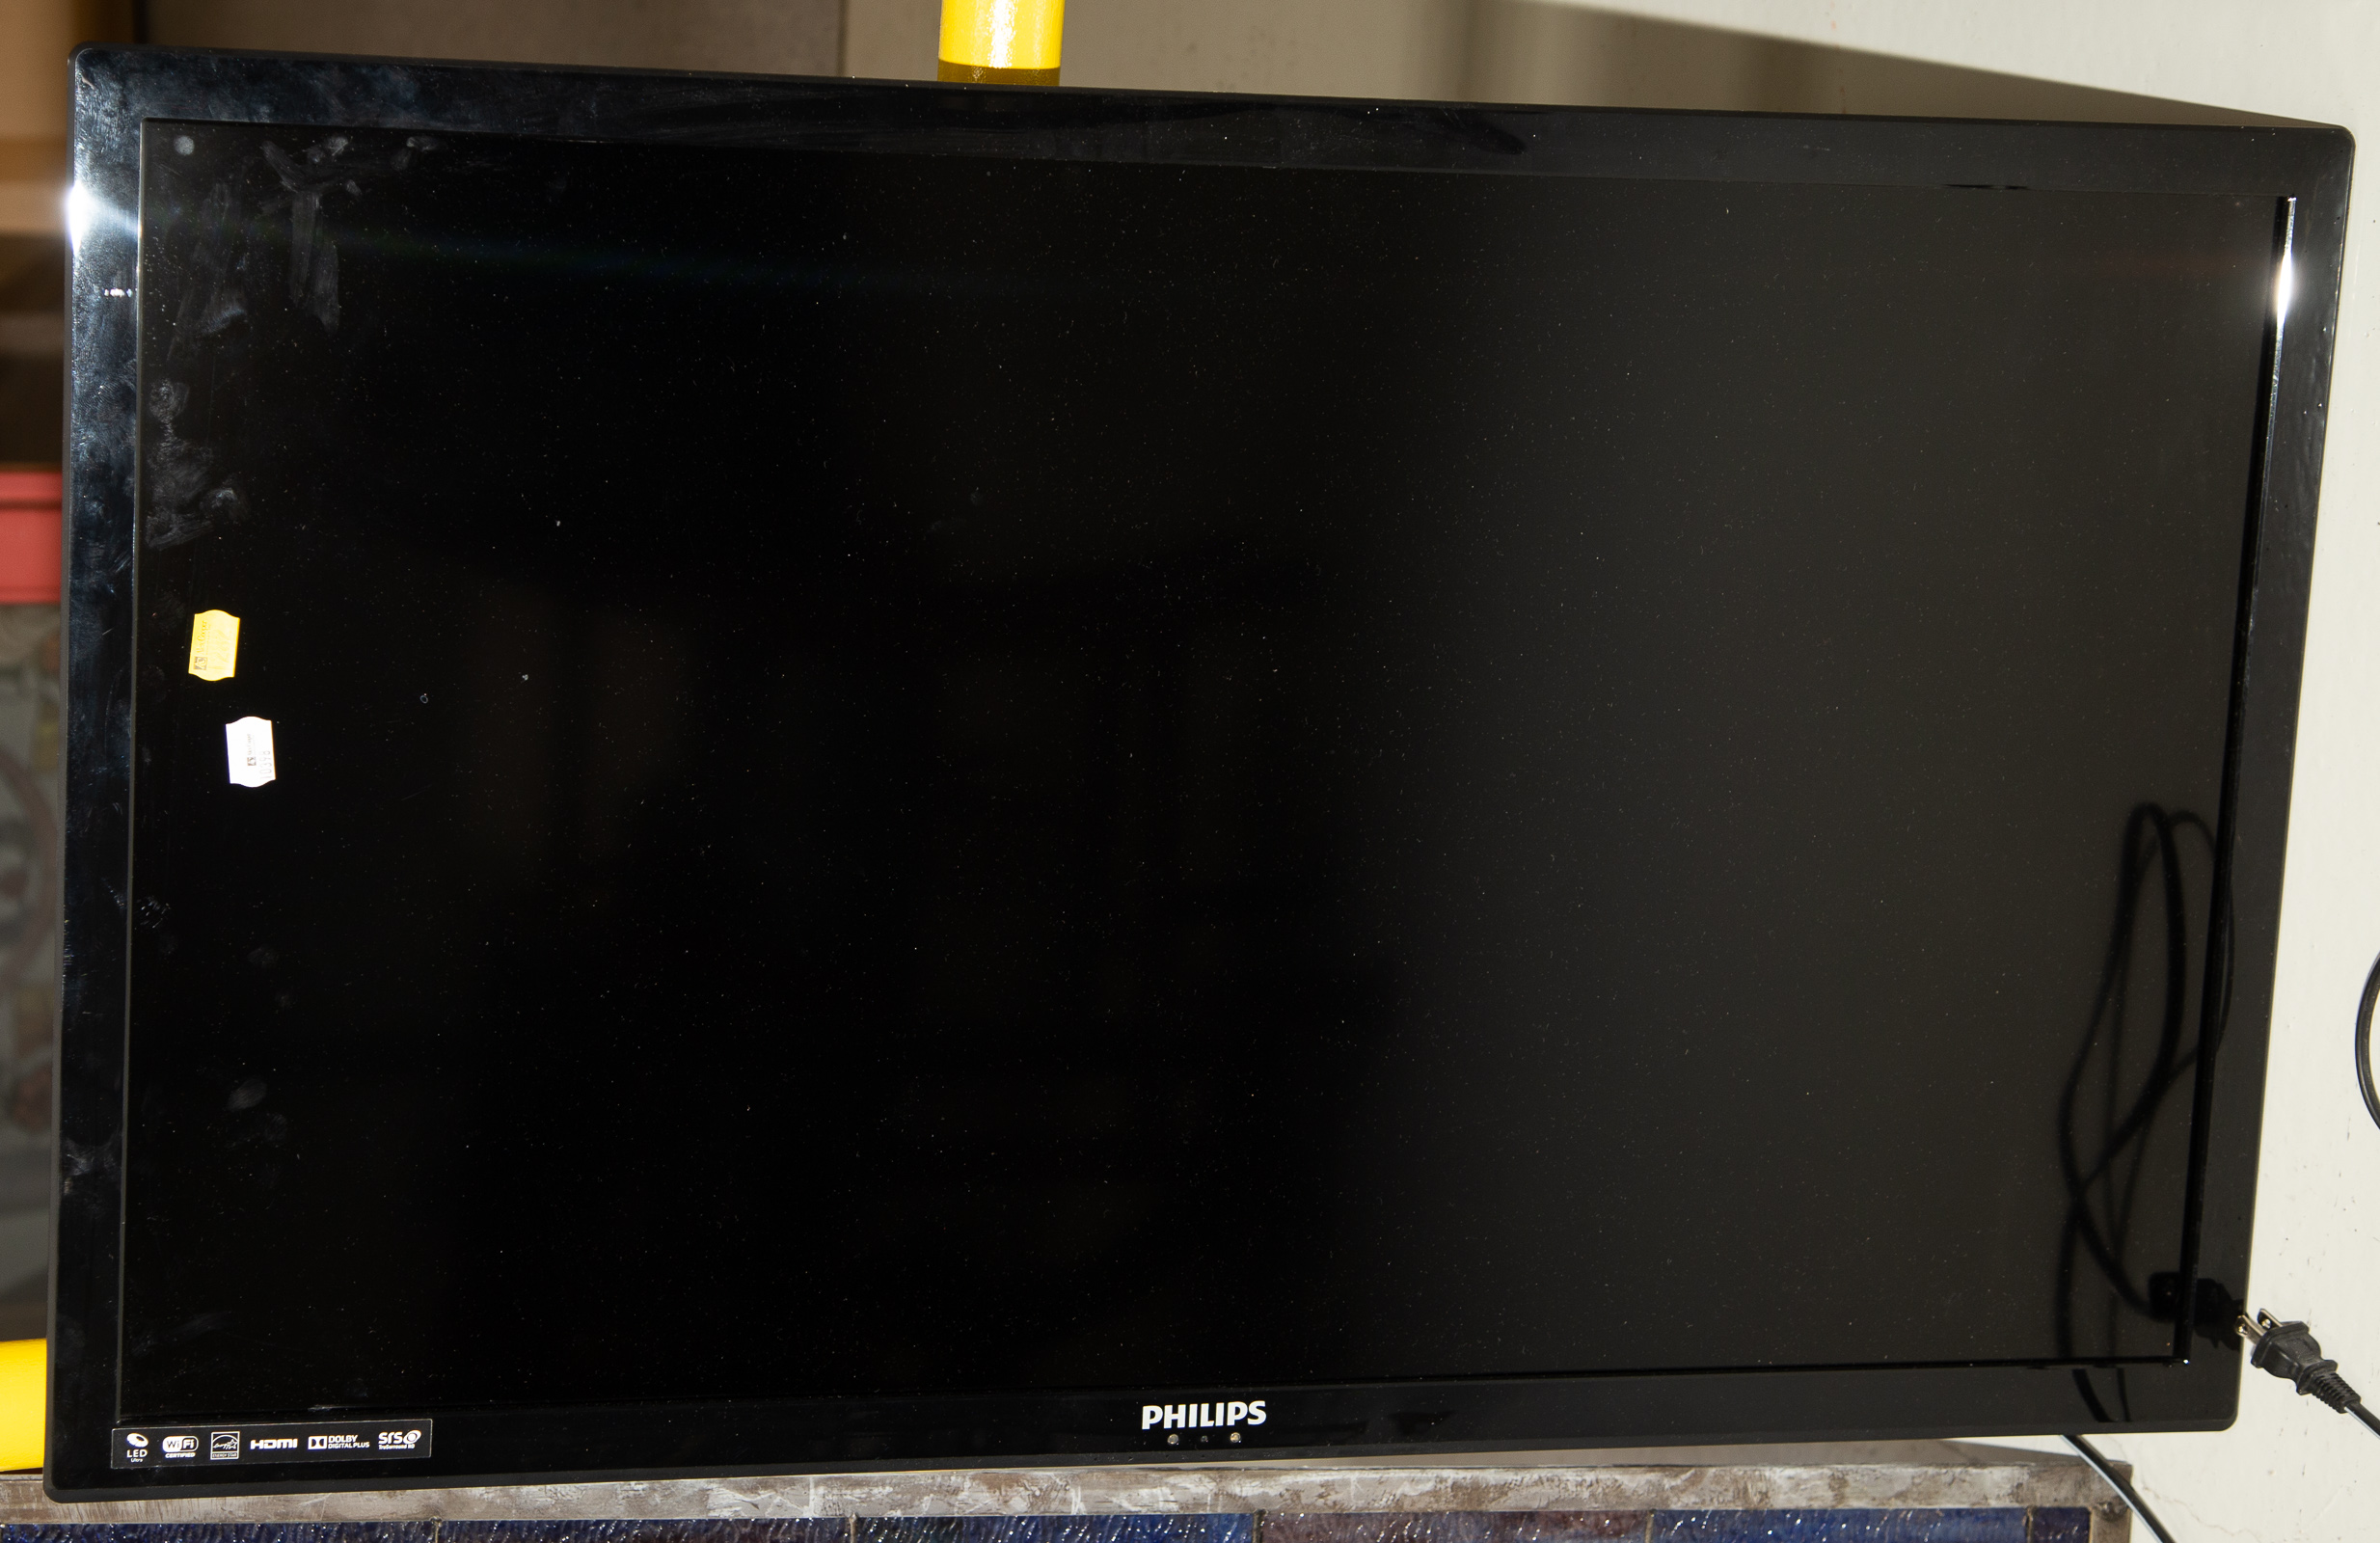 PHILIPS FLAT SCREEN TELEVISION 337887